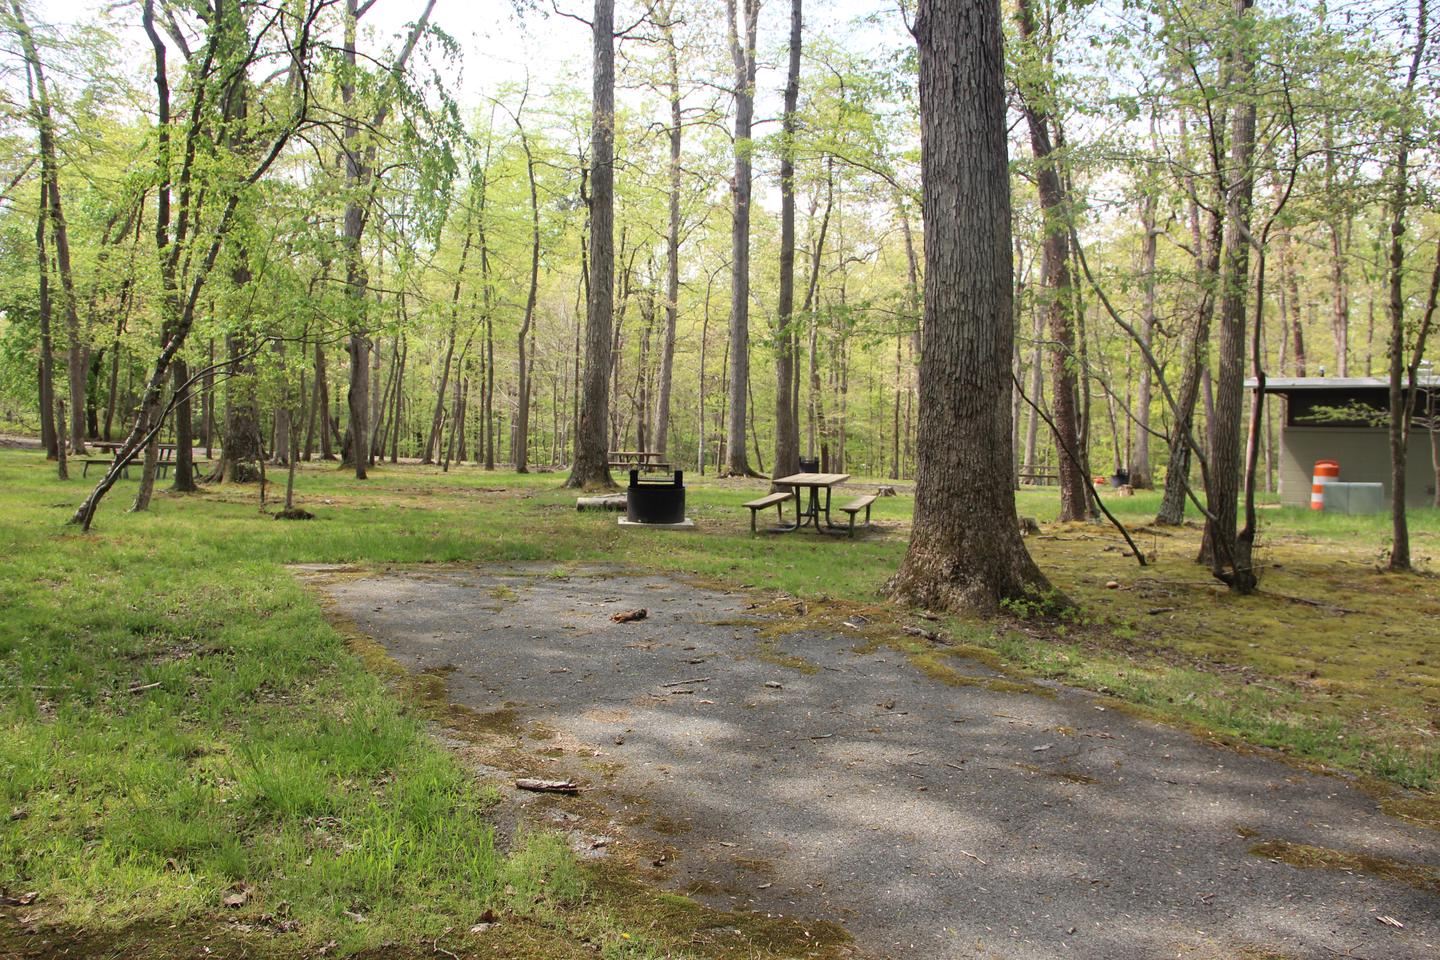 C92 C Loop of the Greenbelt Park Md campgroundC92 C Loop of the Greenbelt Park Maryland campground (former site 95)